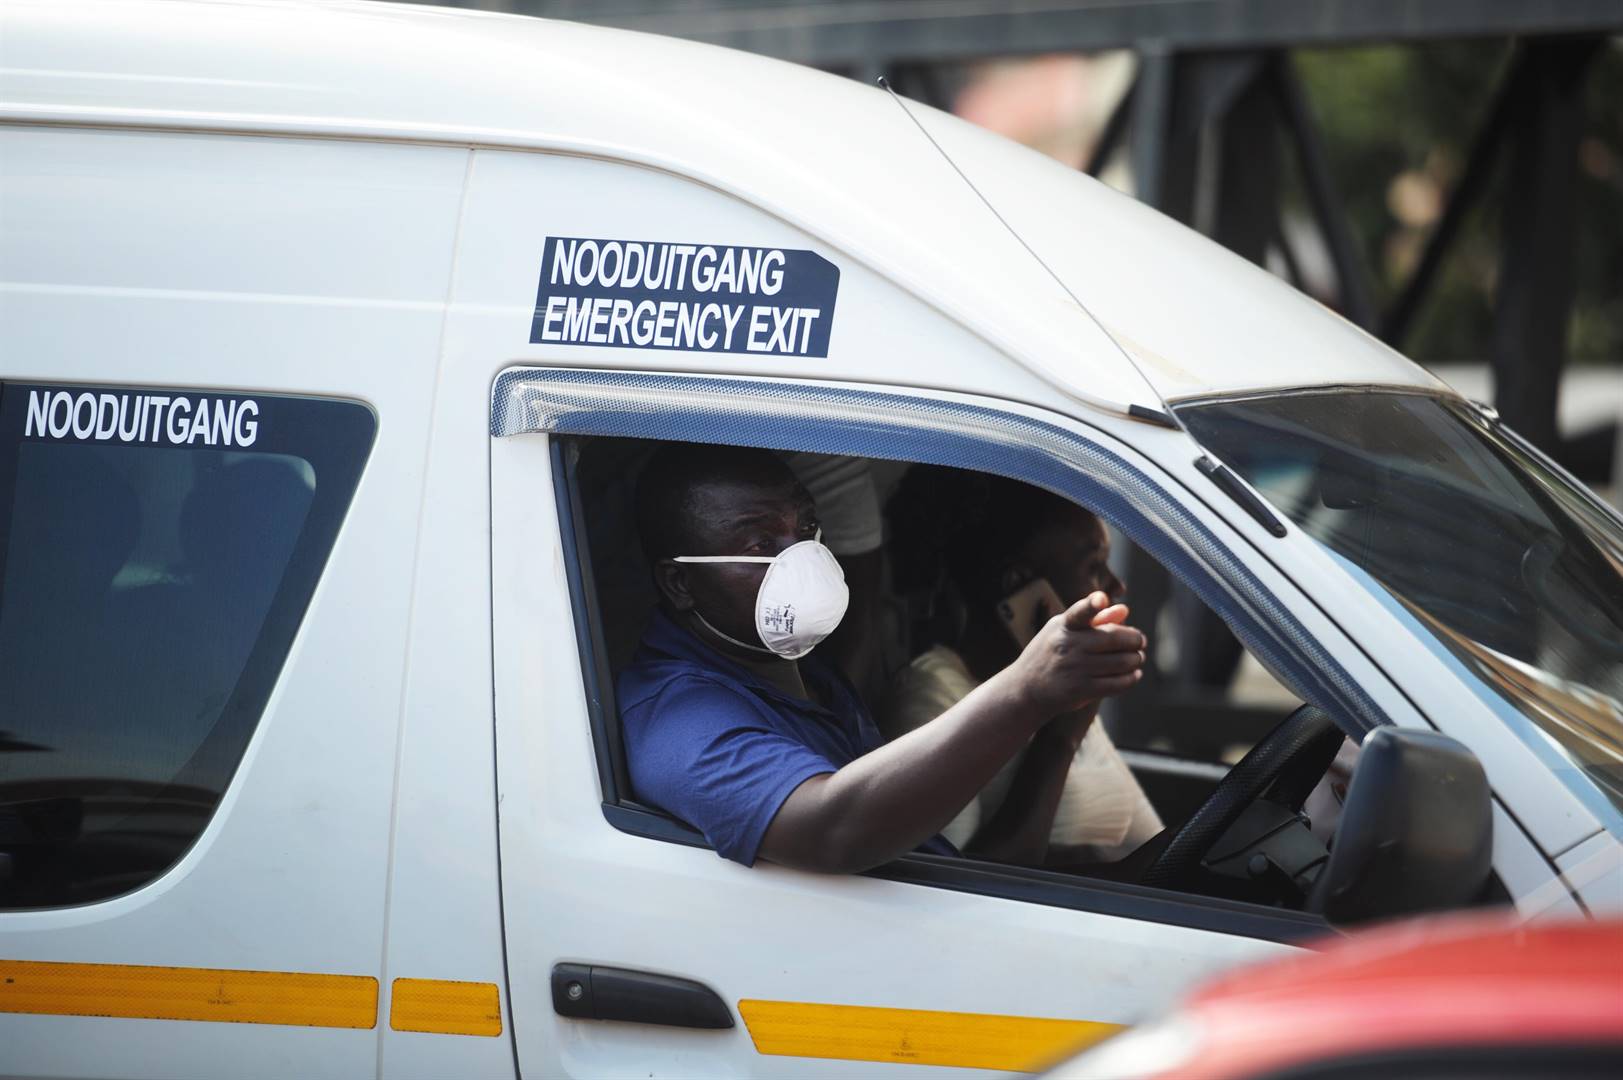 At Wanderers taxi rank most taxi drivers were seen with masks on. Picture: Rosetta Msimango